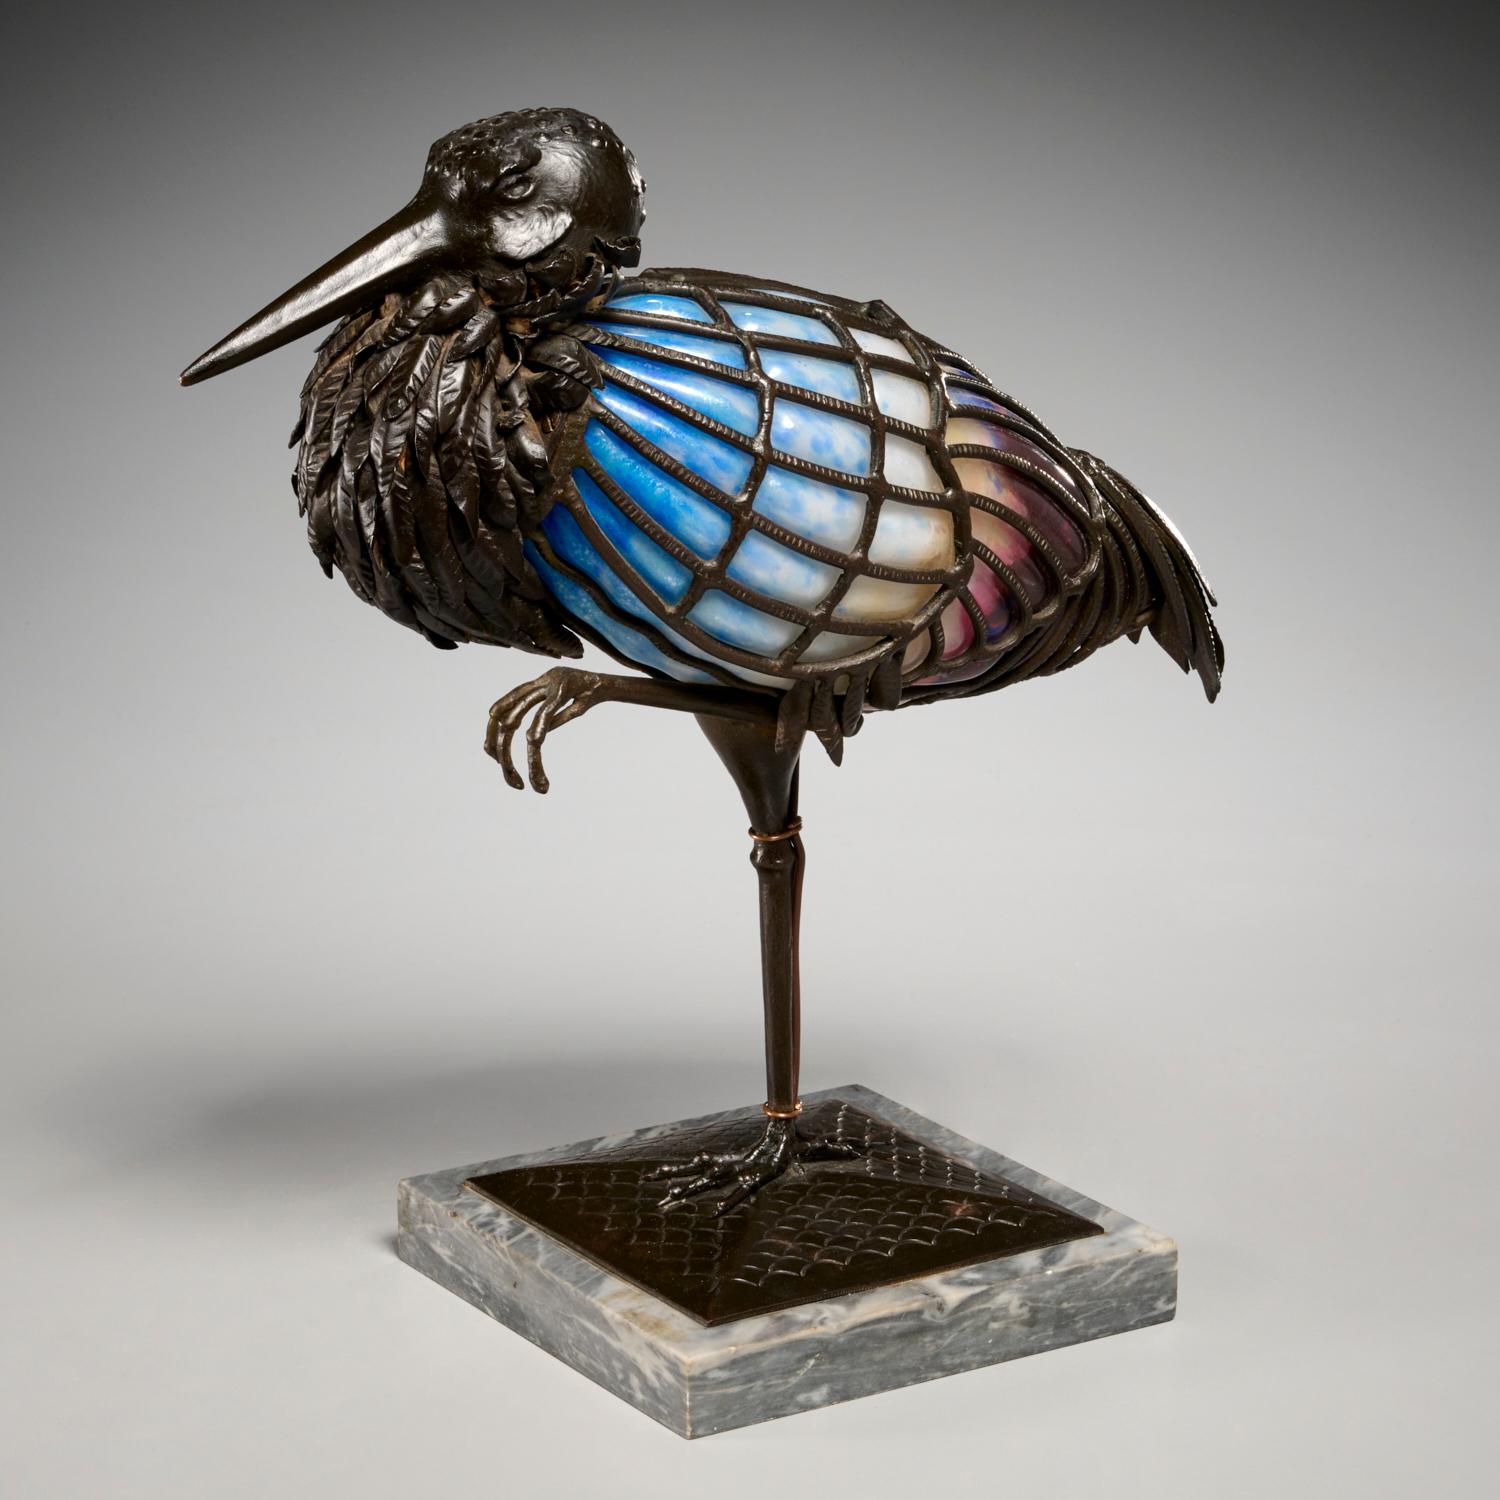 Rare art glass and wrought iron sculptural lamp by Muller-Frères, representing a stork bird standing on one leg . This sculptural lamp is finely crafted with a brown patinated wrought, hammered iron sculpted bird inset with blown 